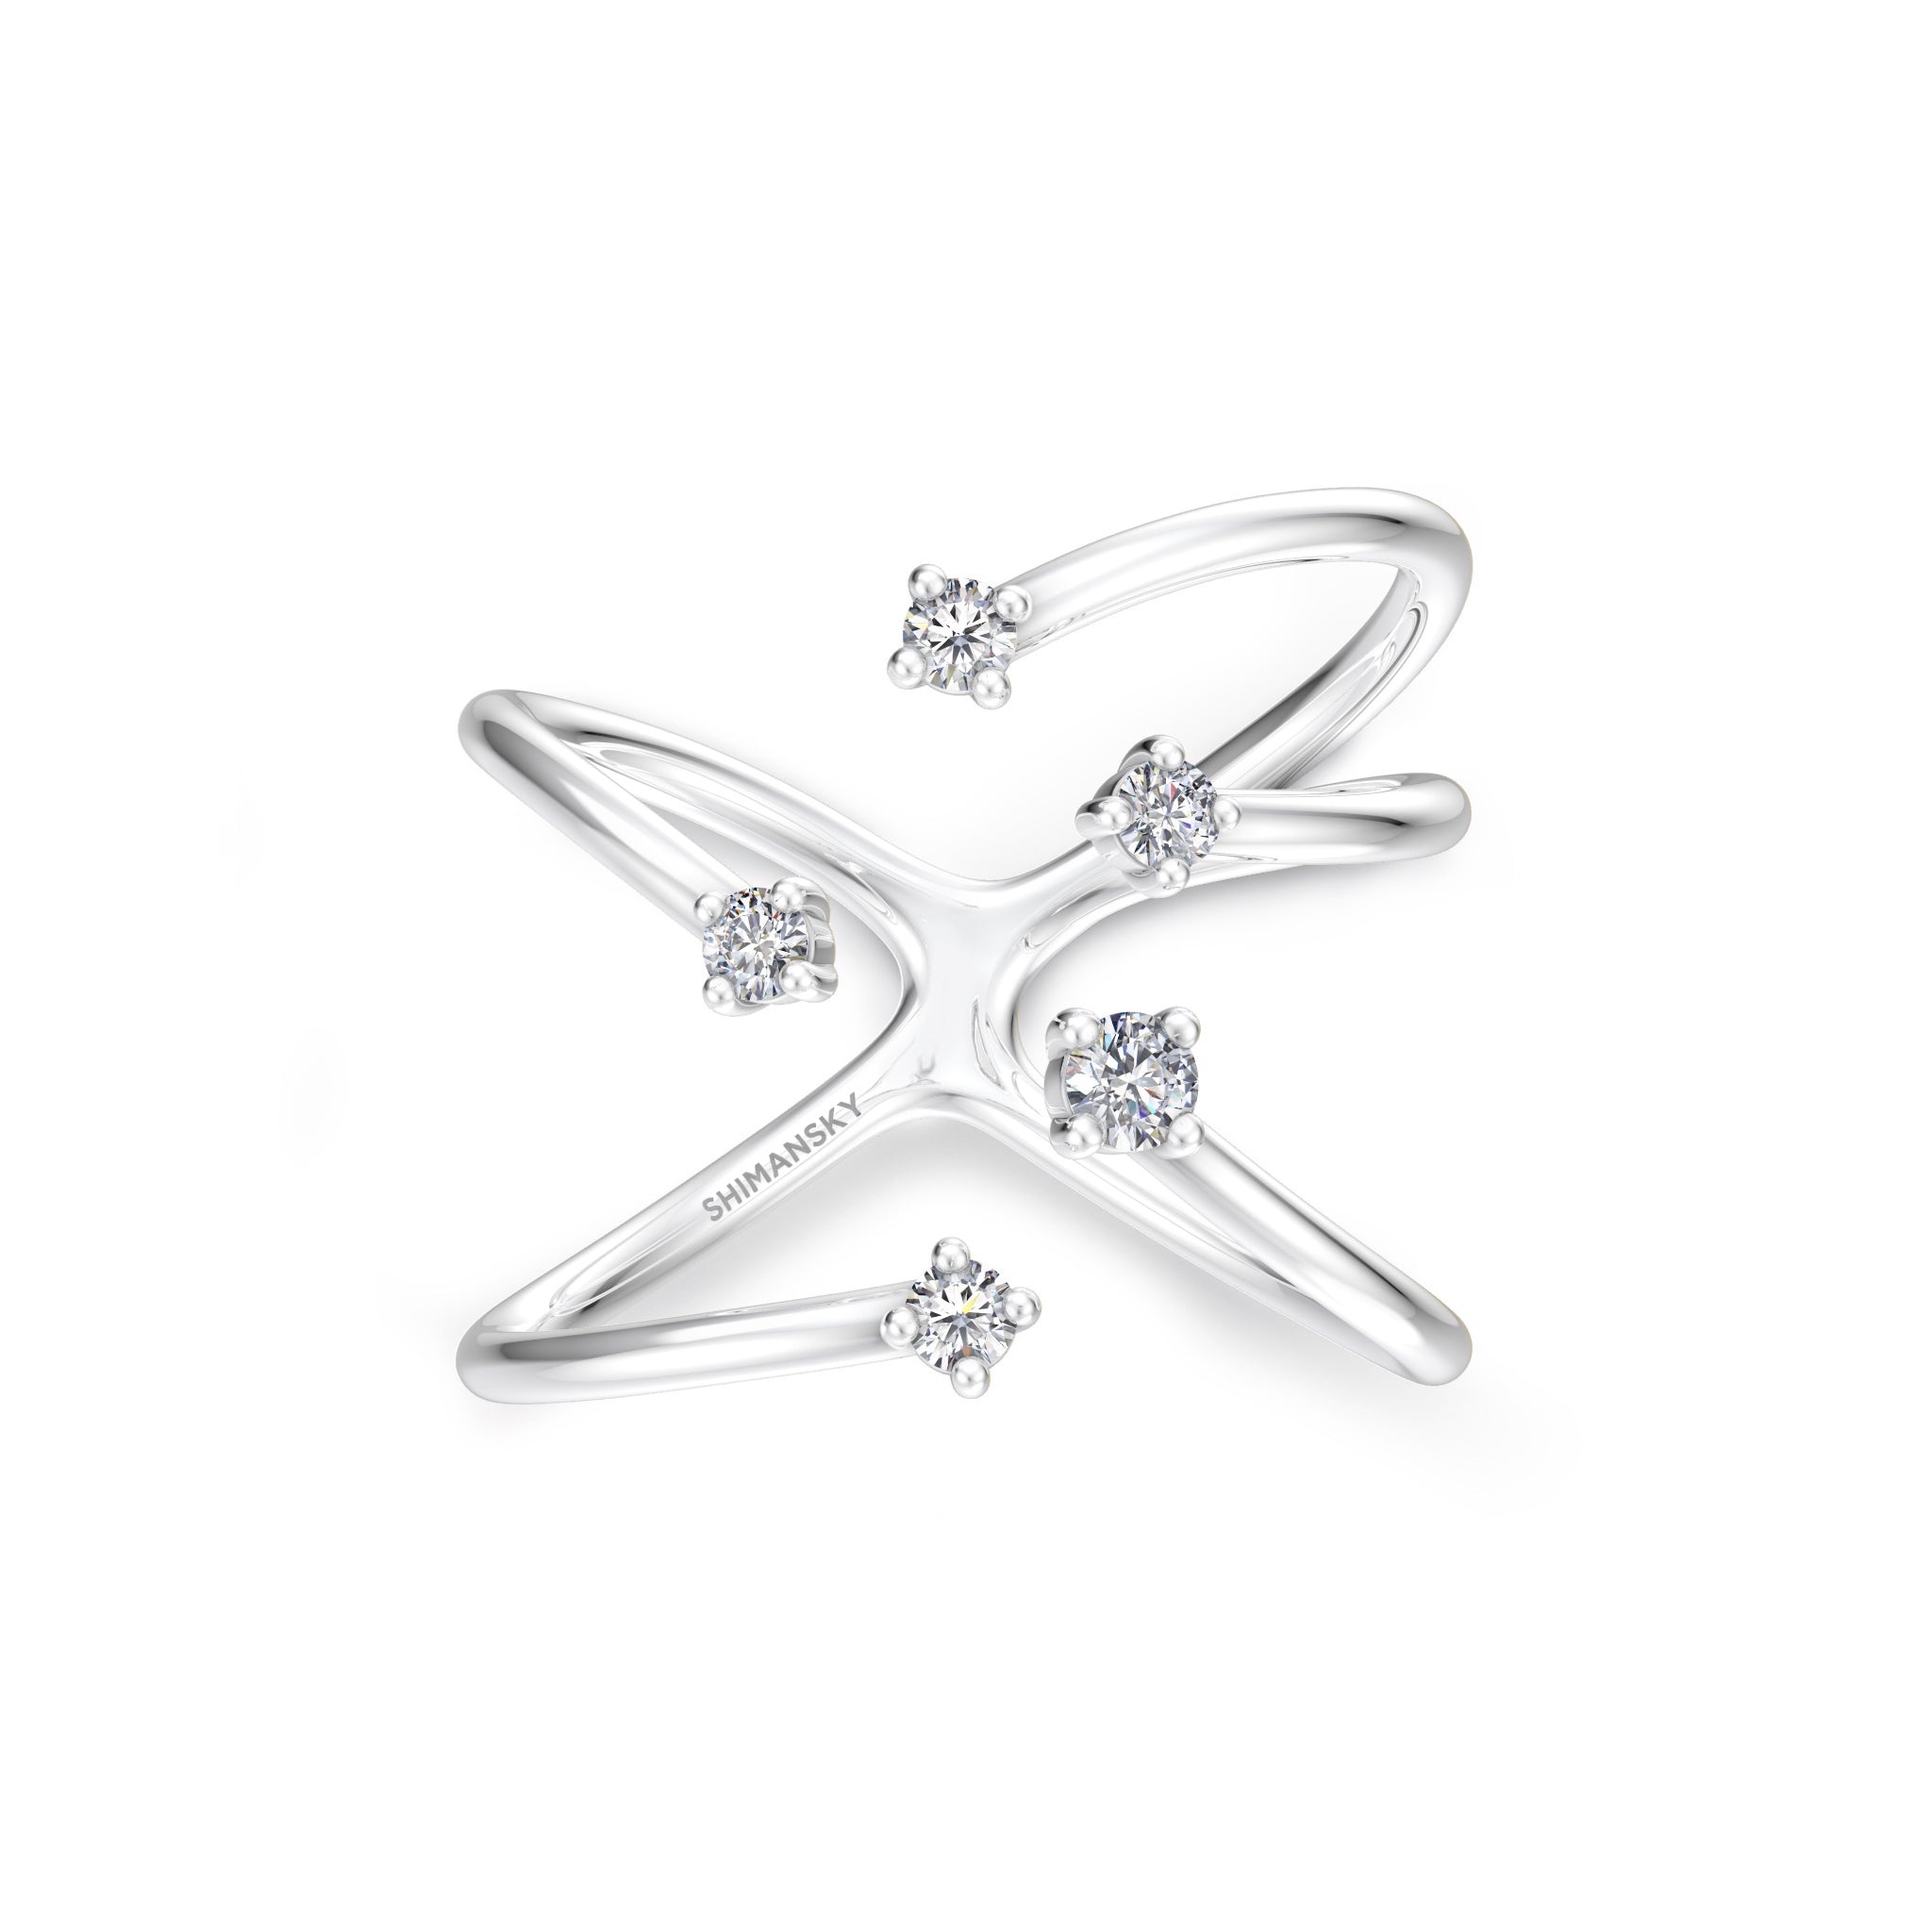 Shimansky - Southern Cross Large Diamond Ring Crafted in 14K White Gold